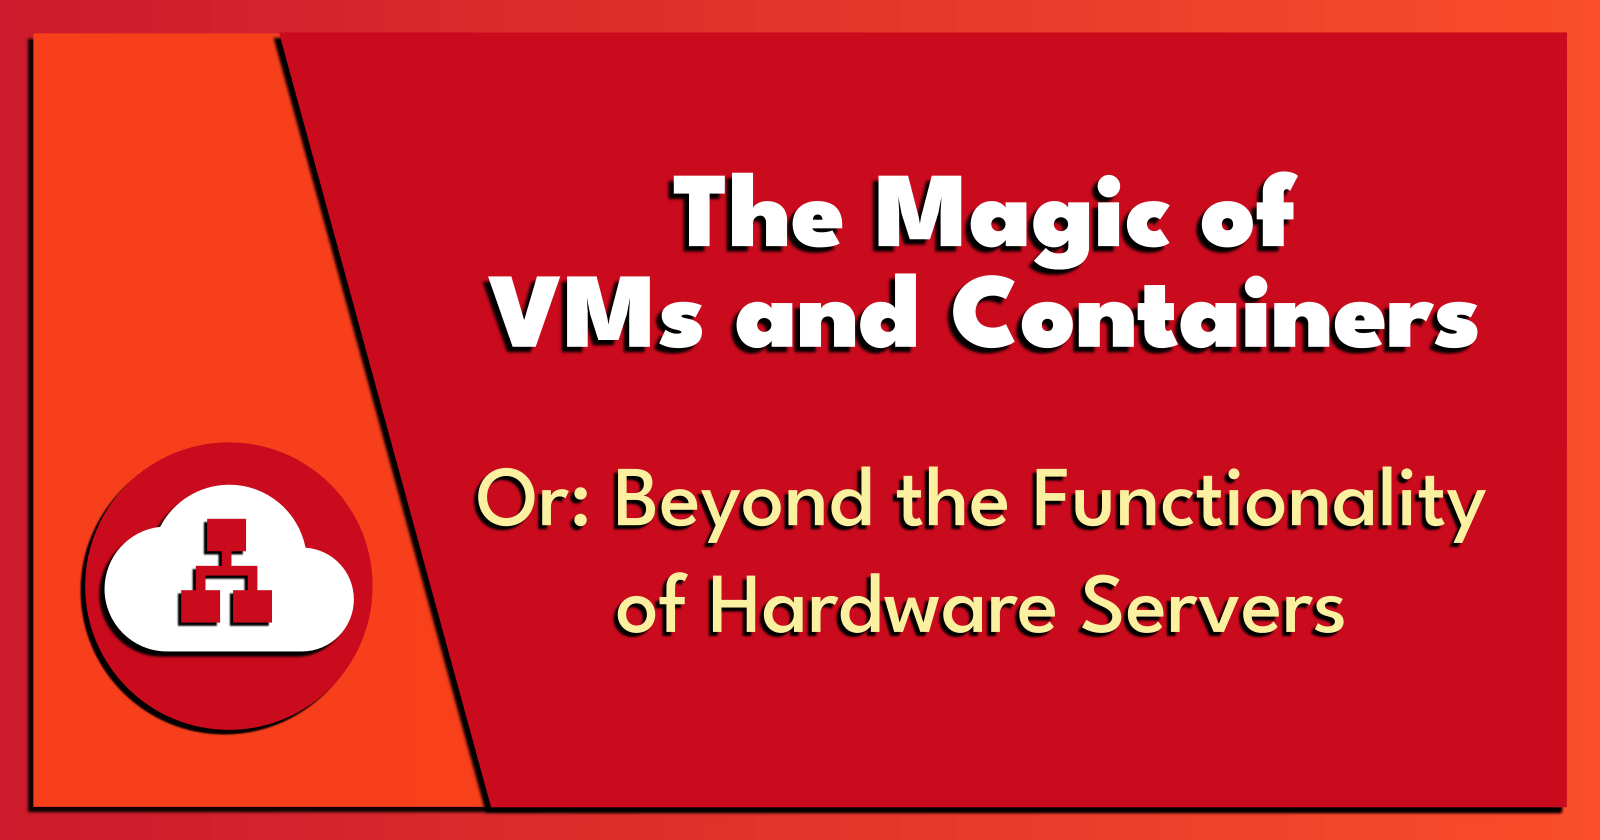 The Magic of VMs and Containers.